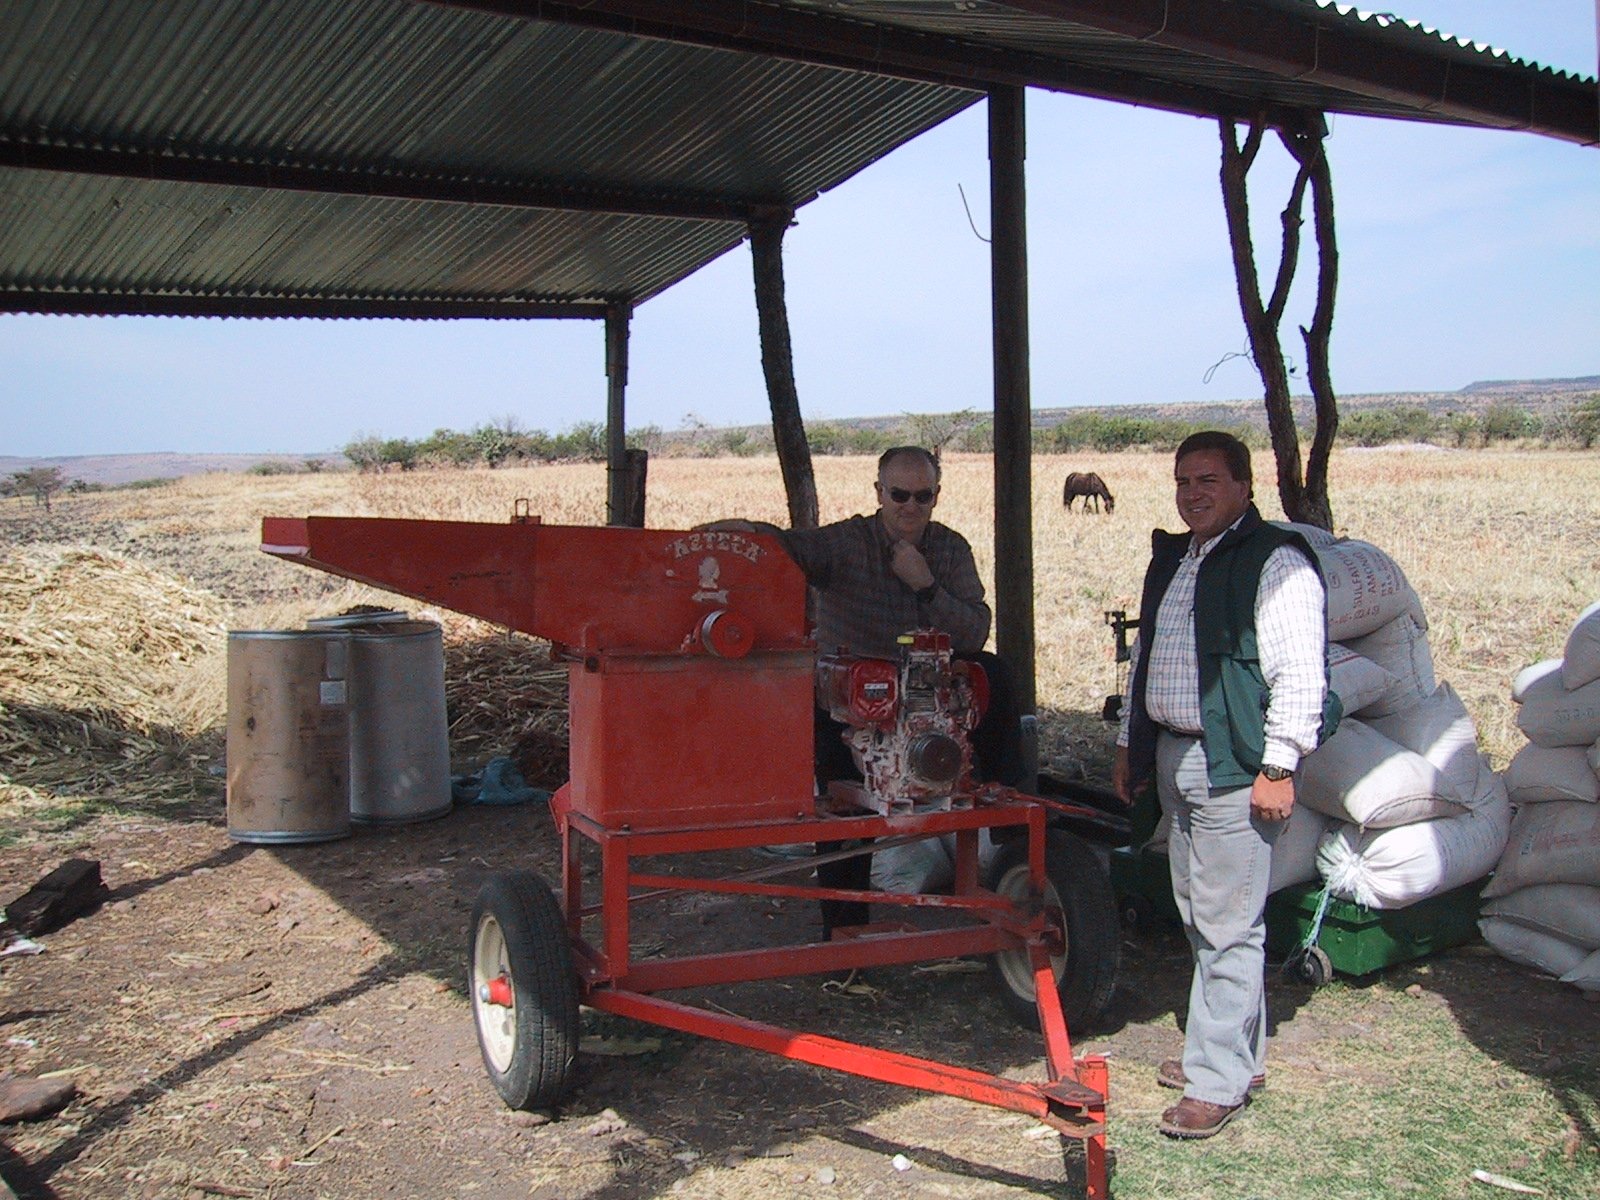 Juan Alducin working with others in an agriculture project